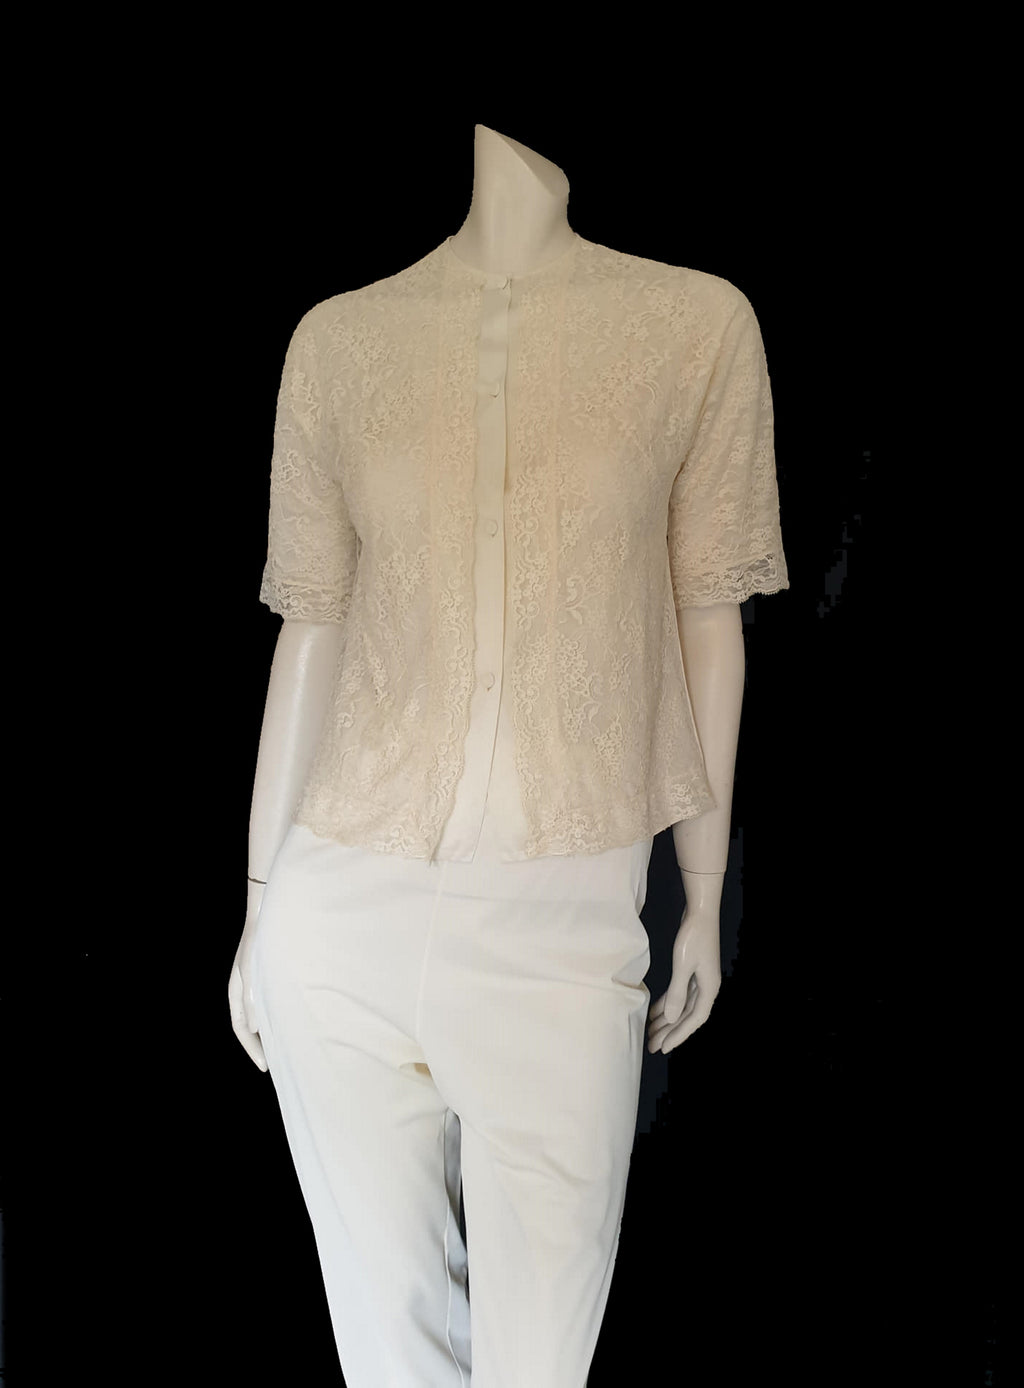 1950s or 1960s pajamas with lace top by vanity fair